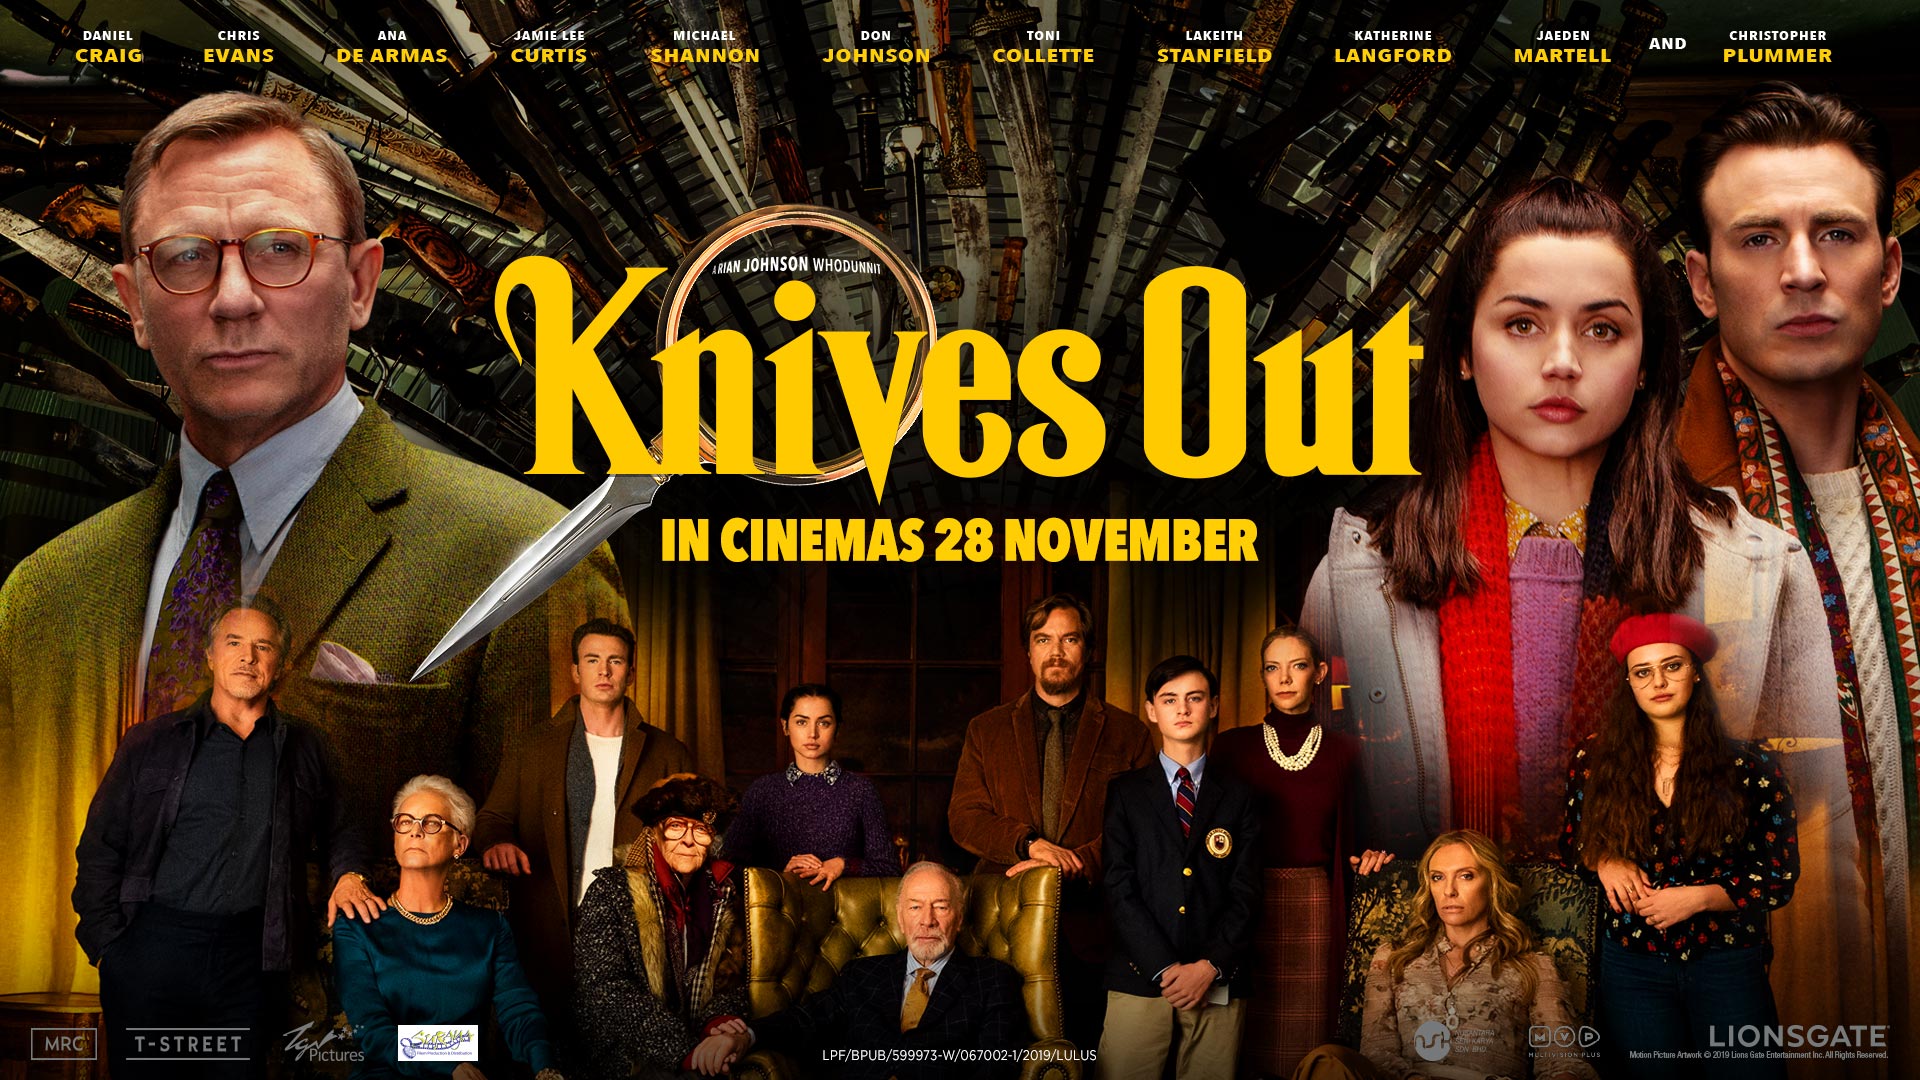 Knives Out Images. 